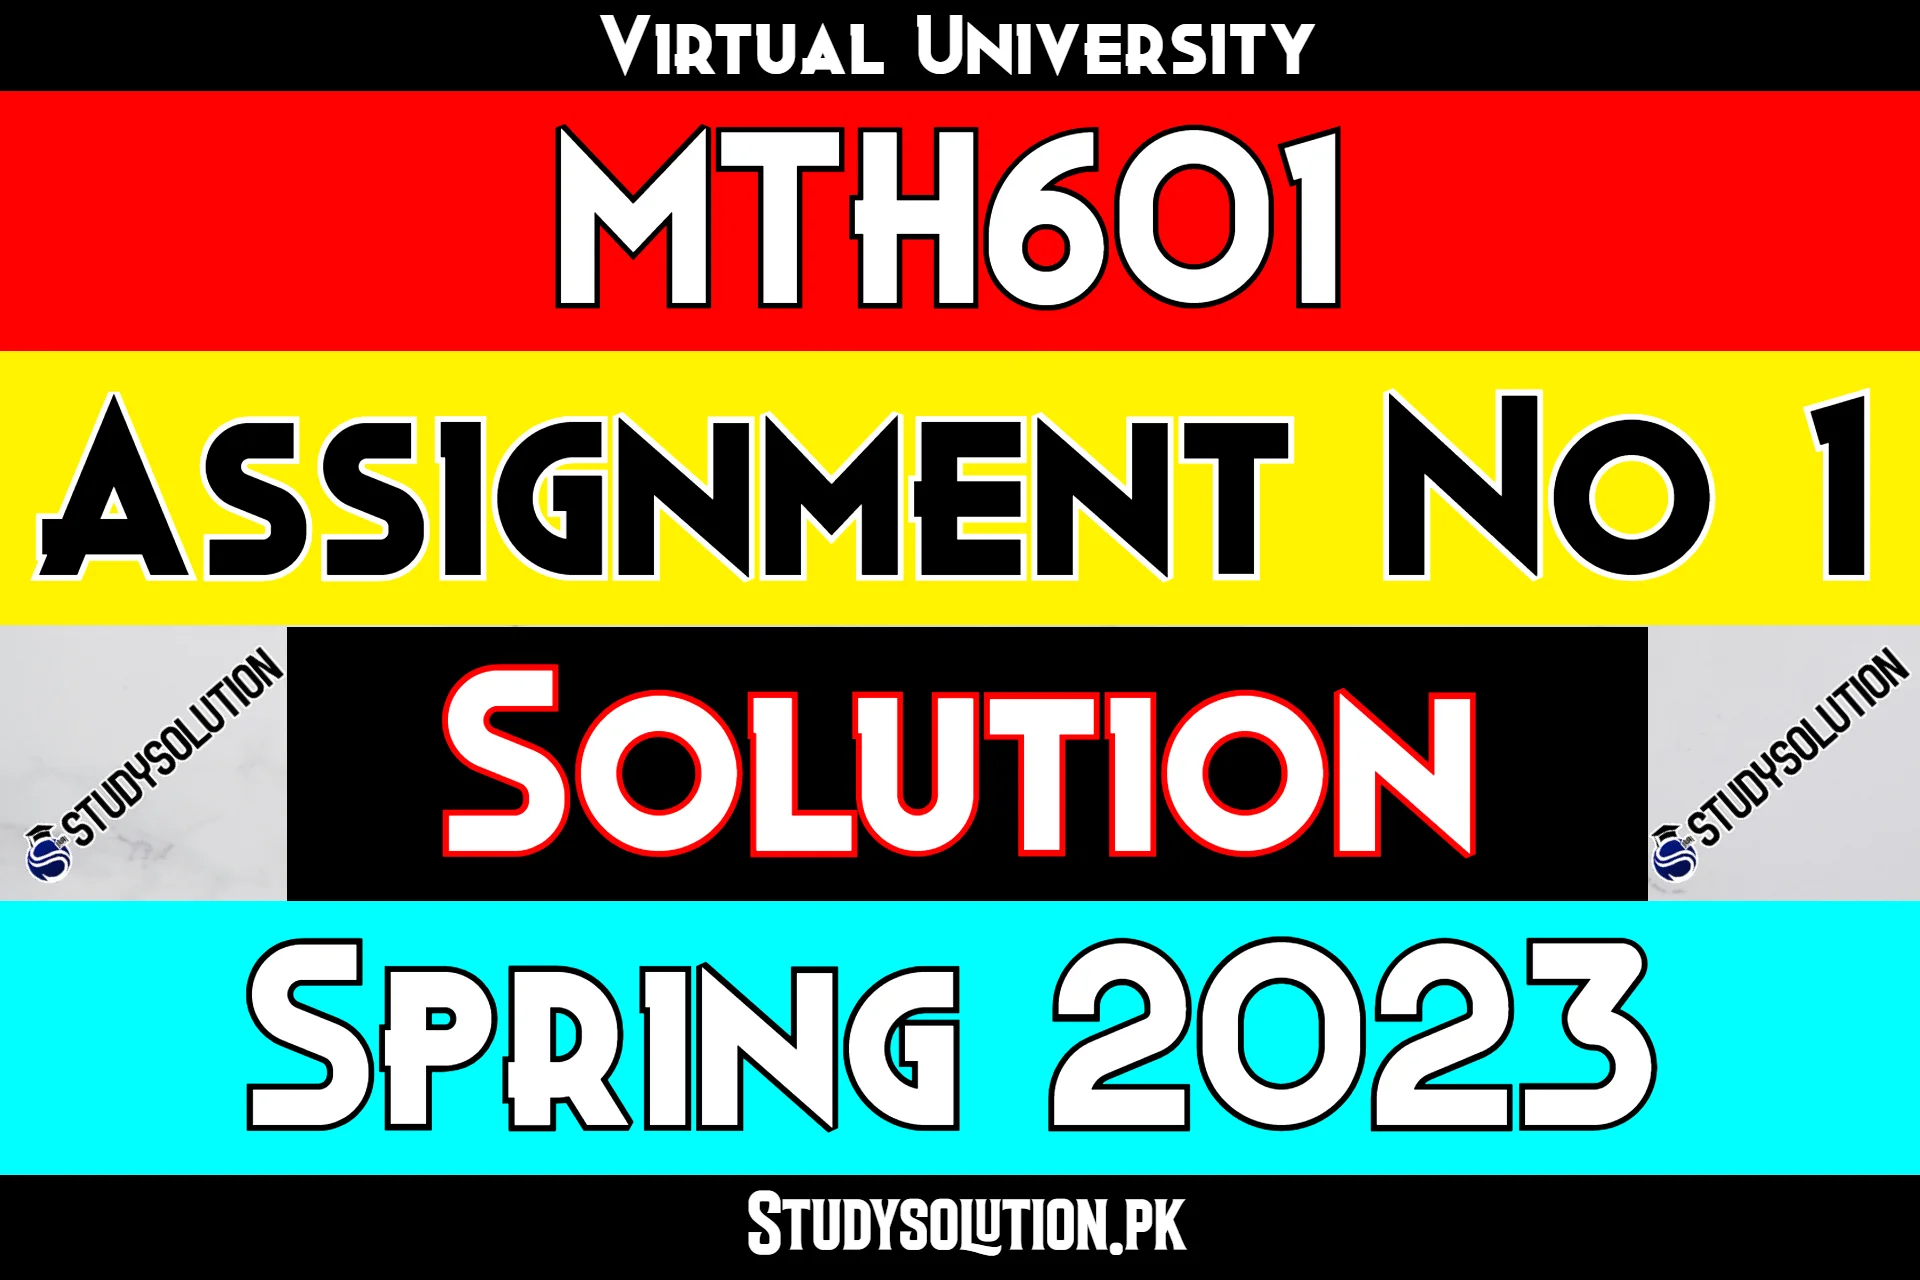 MTH601 Assignment No 1 Solution Spring 2023